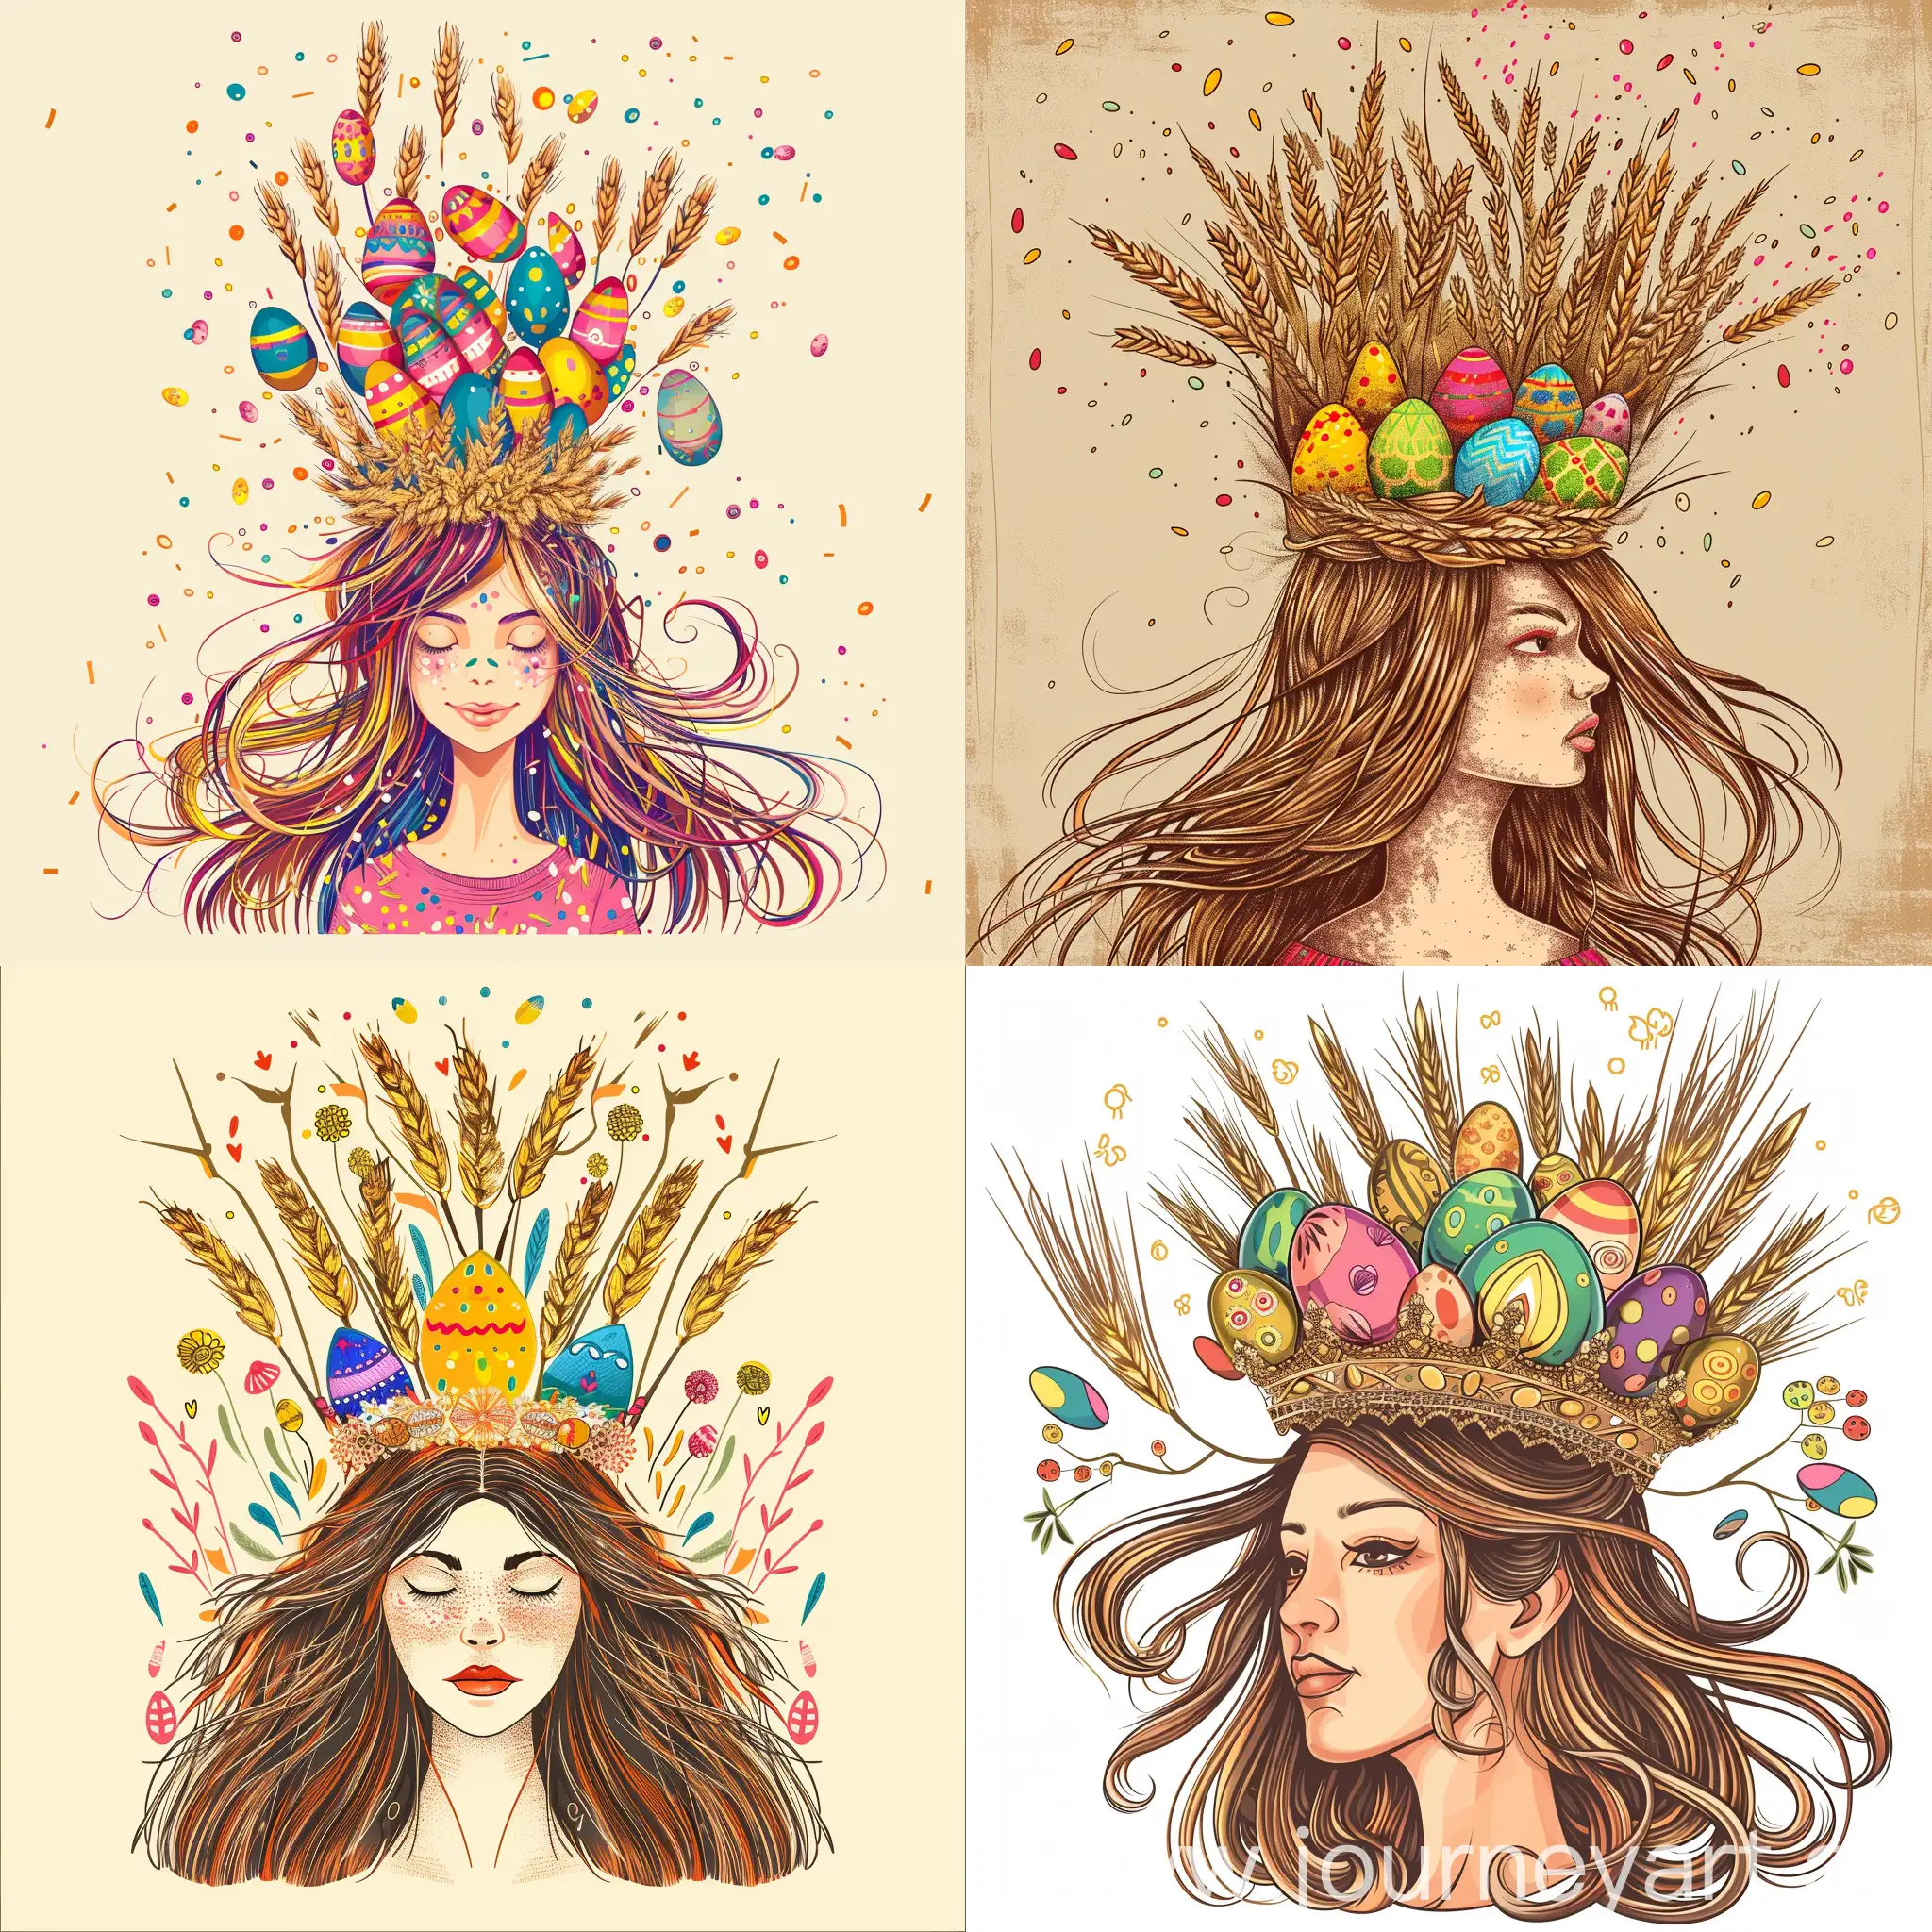 Happy-Easter-Girl-with-Wheat-Crown-and-Colorful-Eggs-TShirt-Design-Graphic